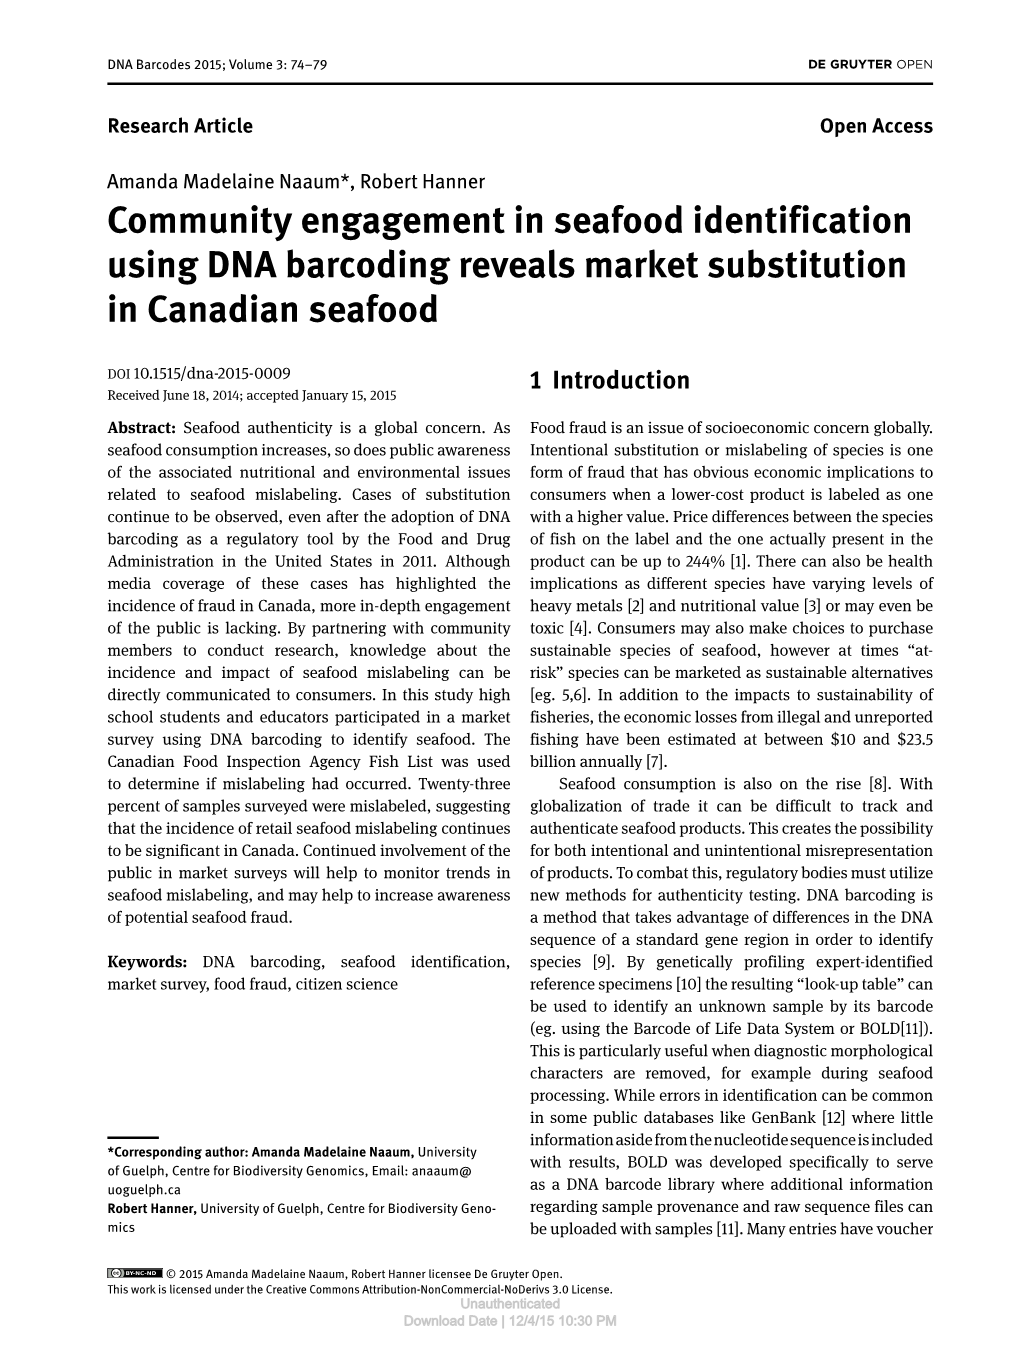 Community Engagement in Seafood Identification Using DNA Barcoding Reveals Market Substitution in Canadian Seafood